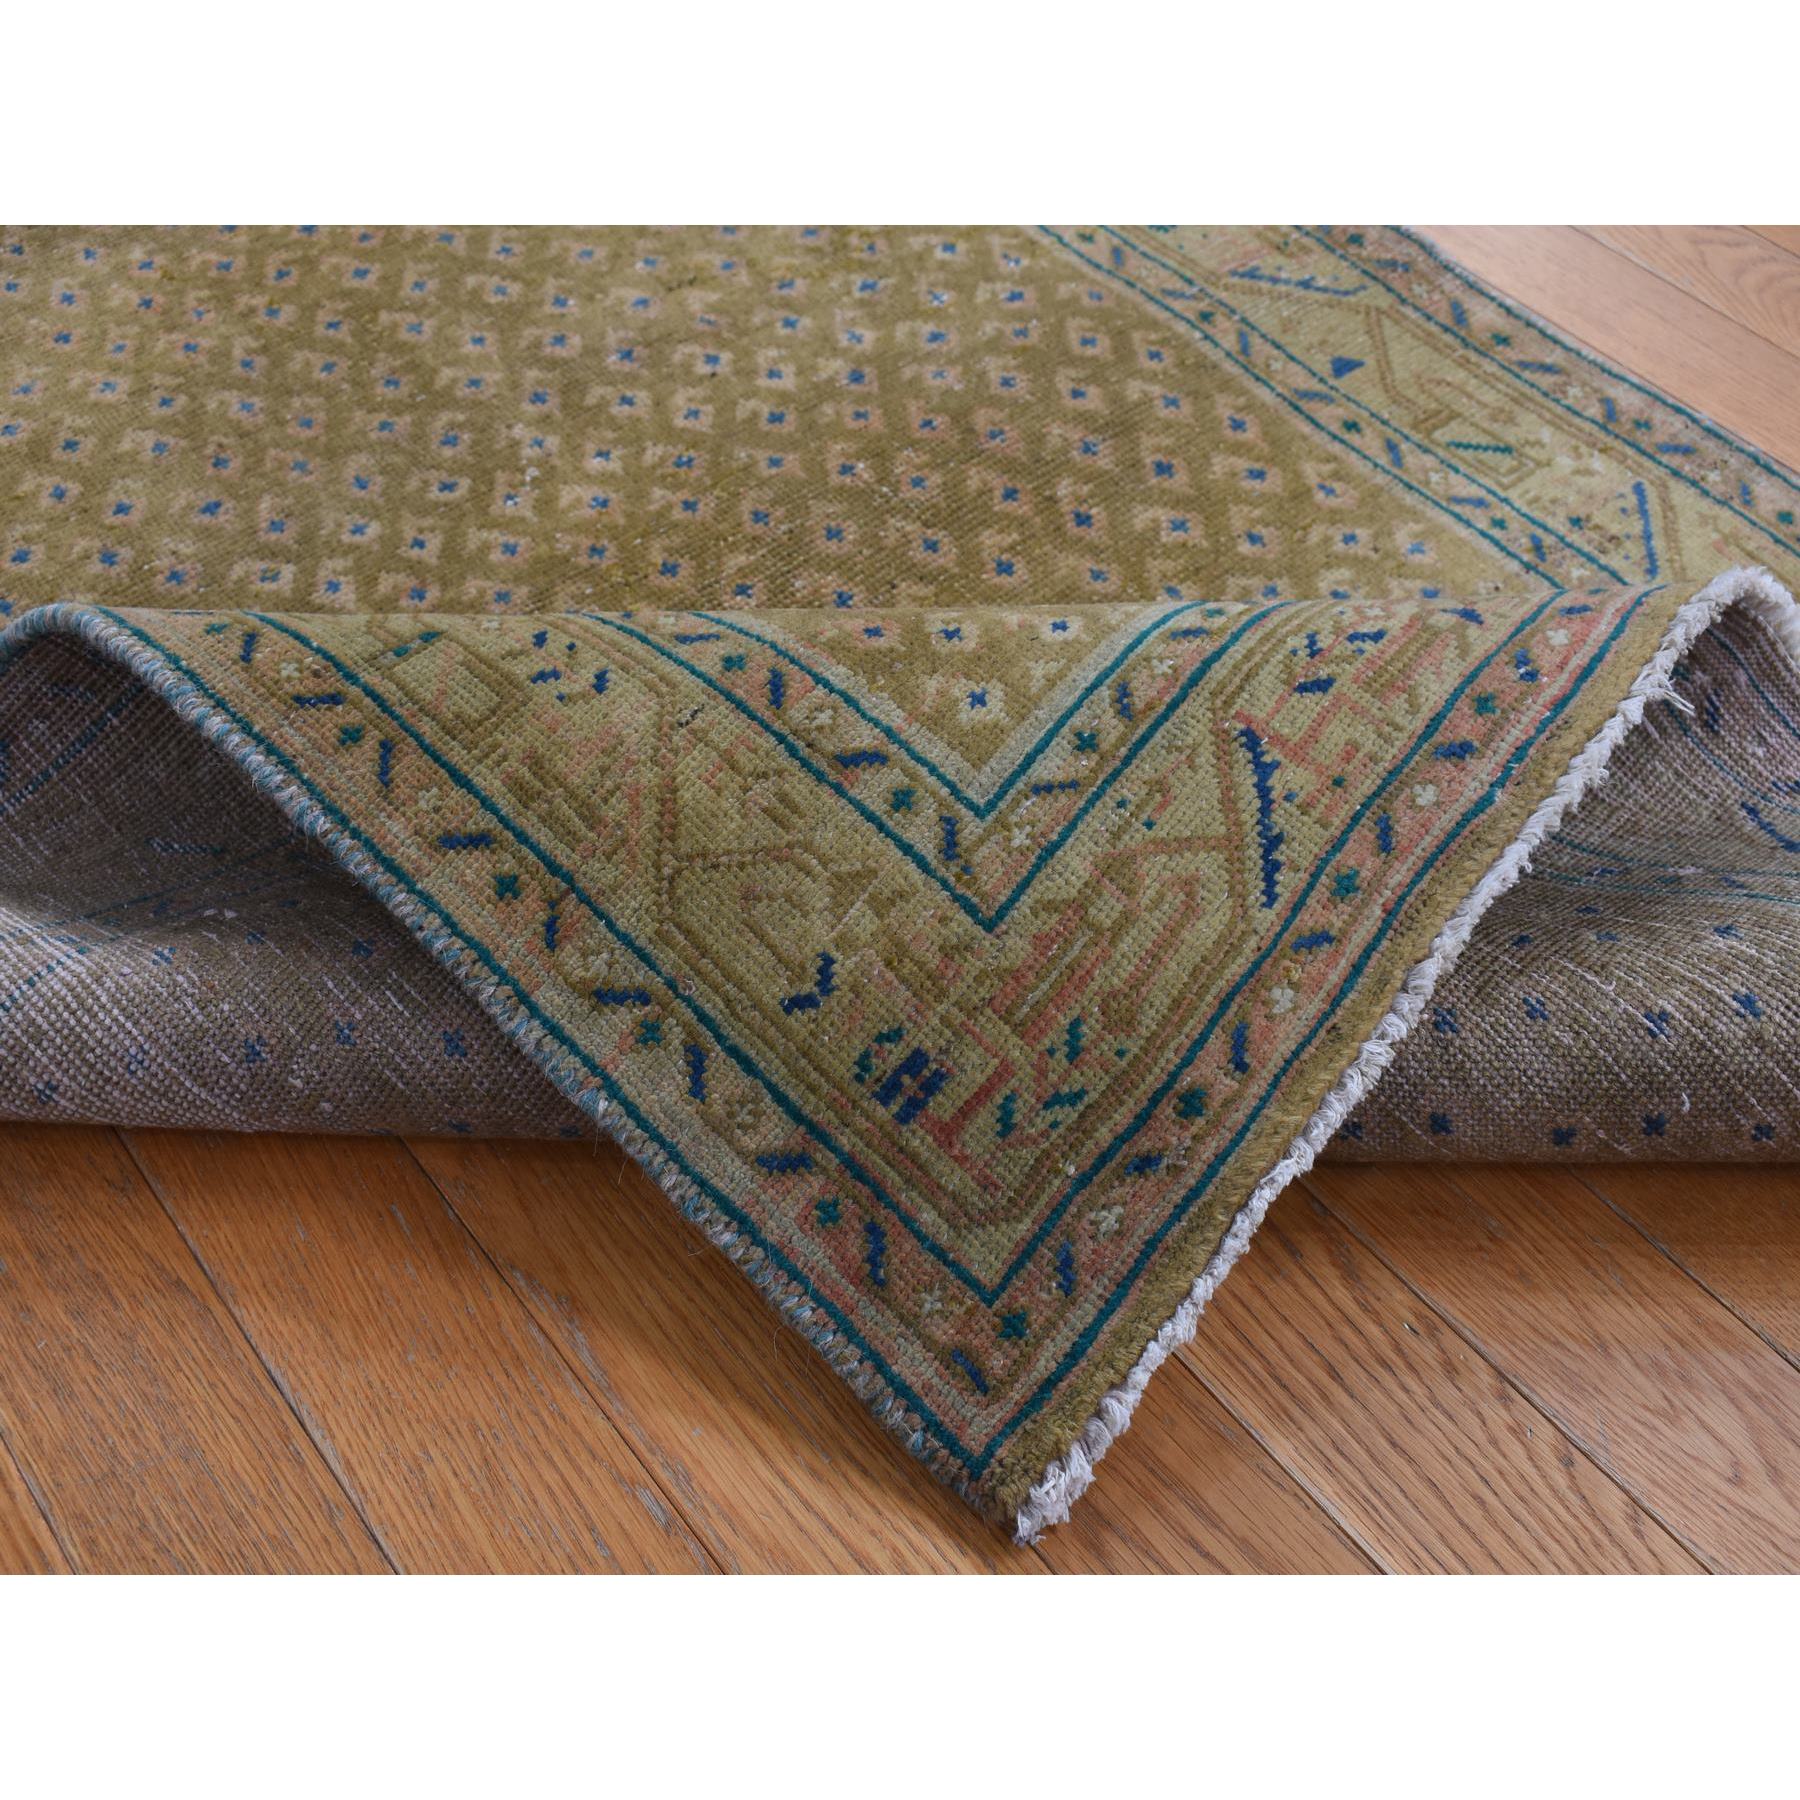  Wool Hand-Knotted Area Rug 3'6